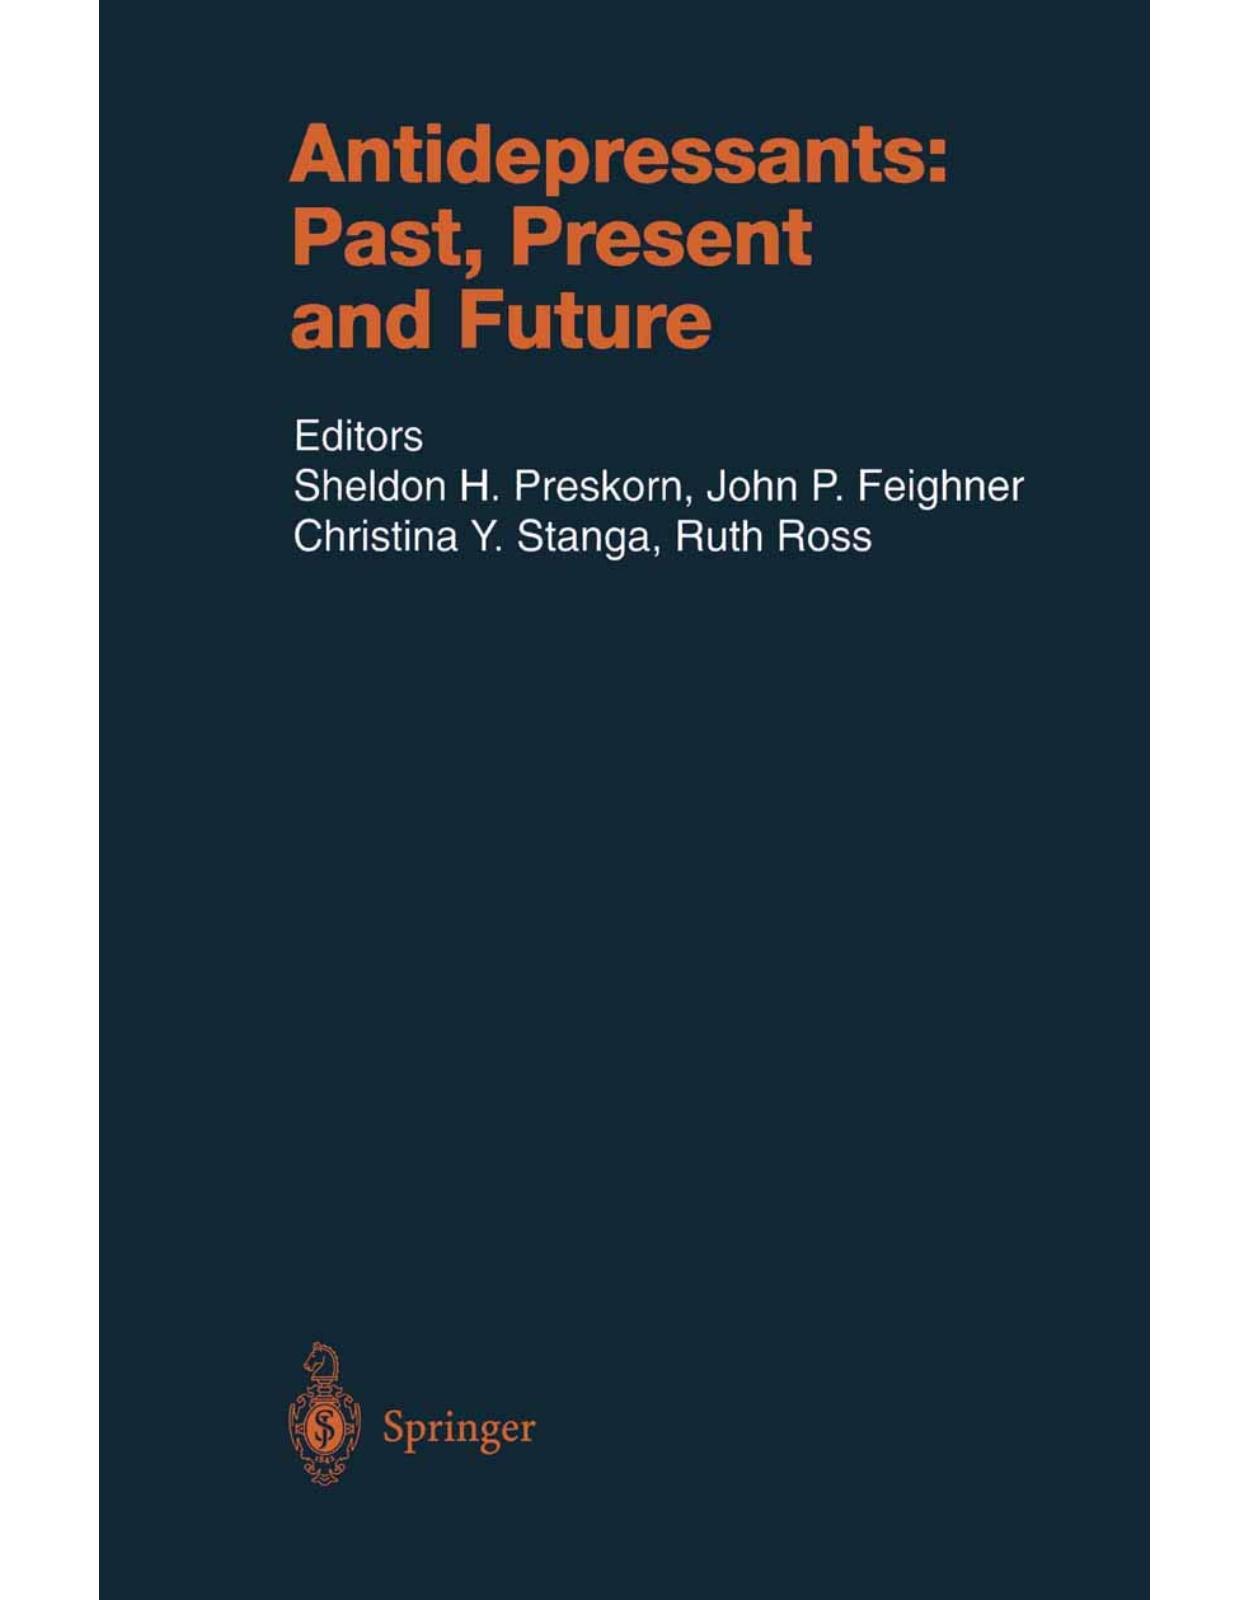 Antidepressants: Past, Present and Future (Handbook of Experimental Pharmacology)